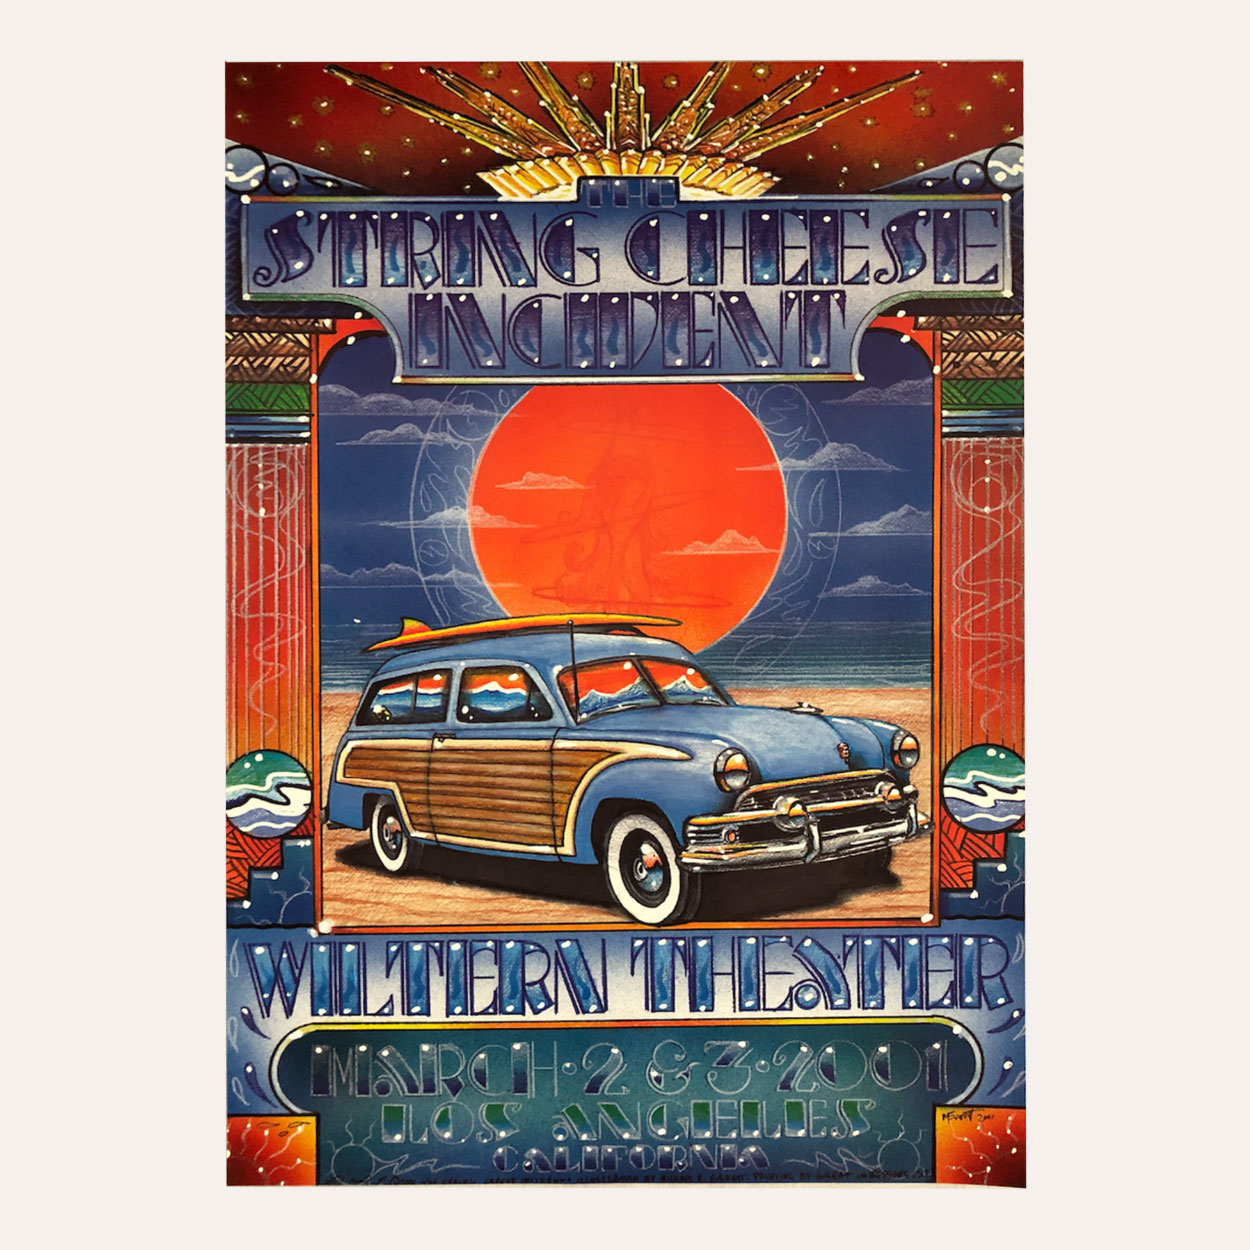 The String Cheese Incident - Show Poster - Gig Poster - Wiltern Theater, Los Angeles - March 2nd and 3rd, 2001